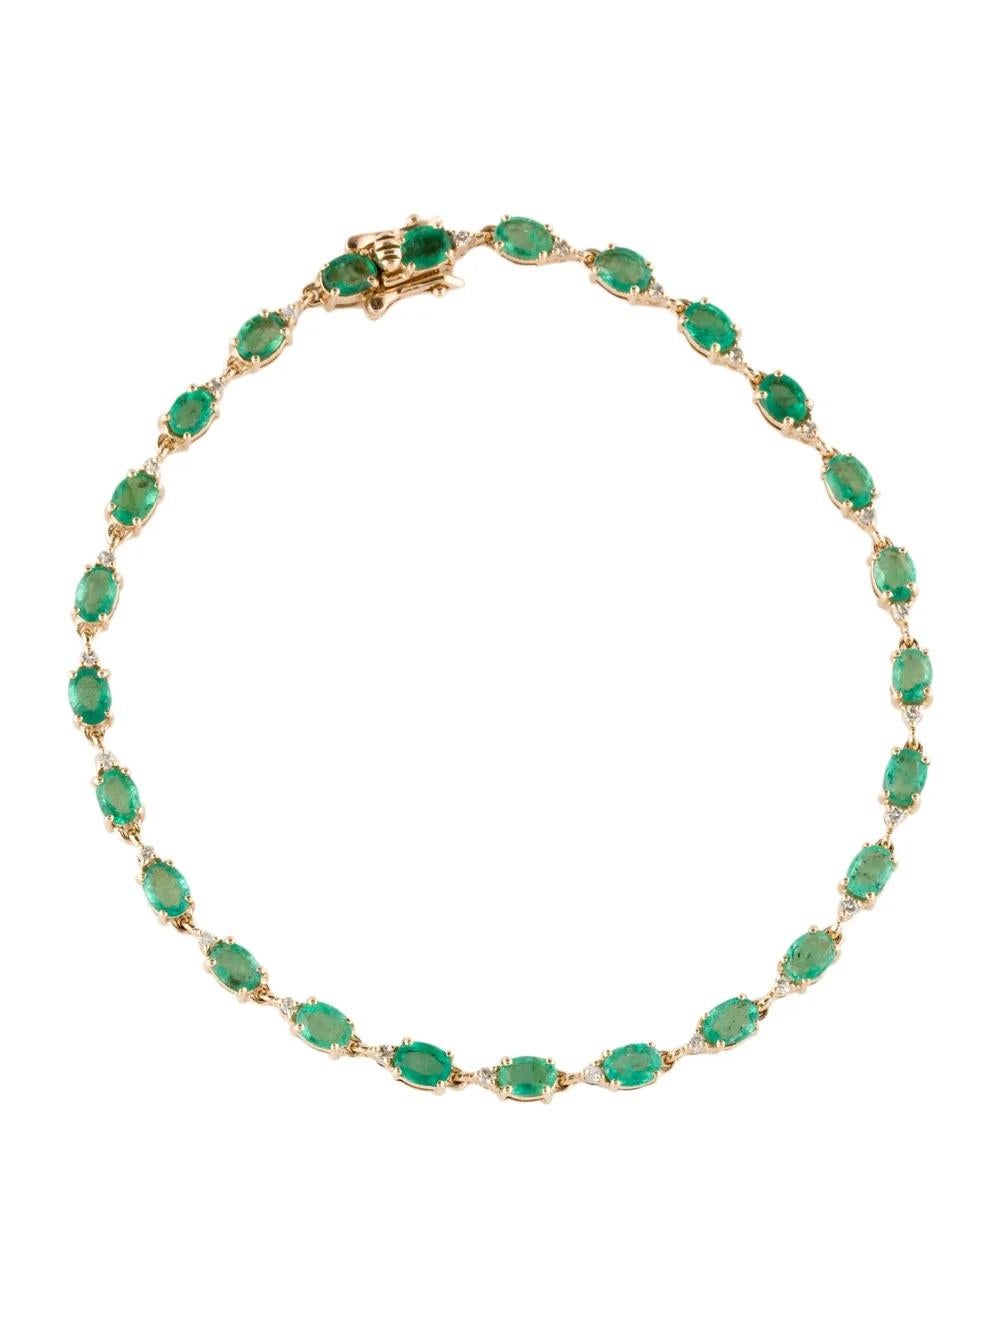 This stunning 14K Yellow Gold bracelet boasts elegance and sophistication with its exquisite design and exceptional gemstones. Crafted to perfection, it features a captivating 2.70 Carat Oval Brilliant Emerald, surrounded by 24 shimmering Single Cut